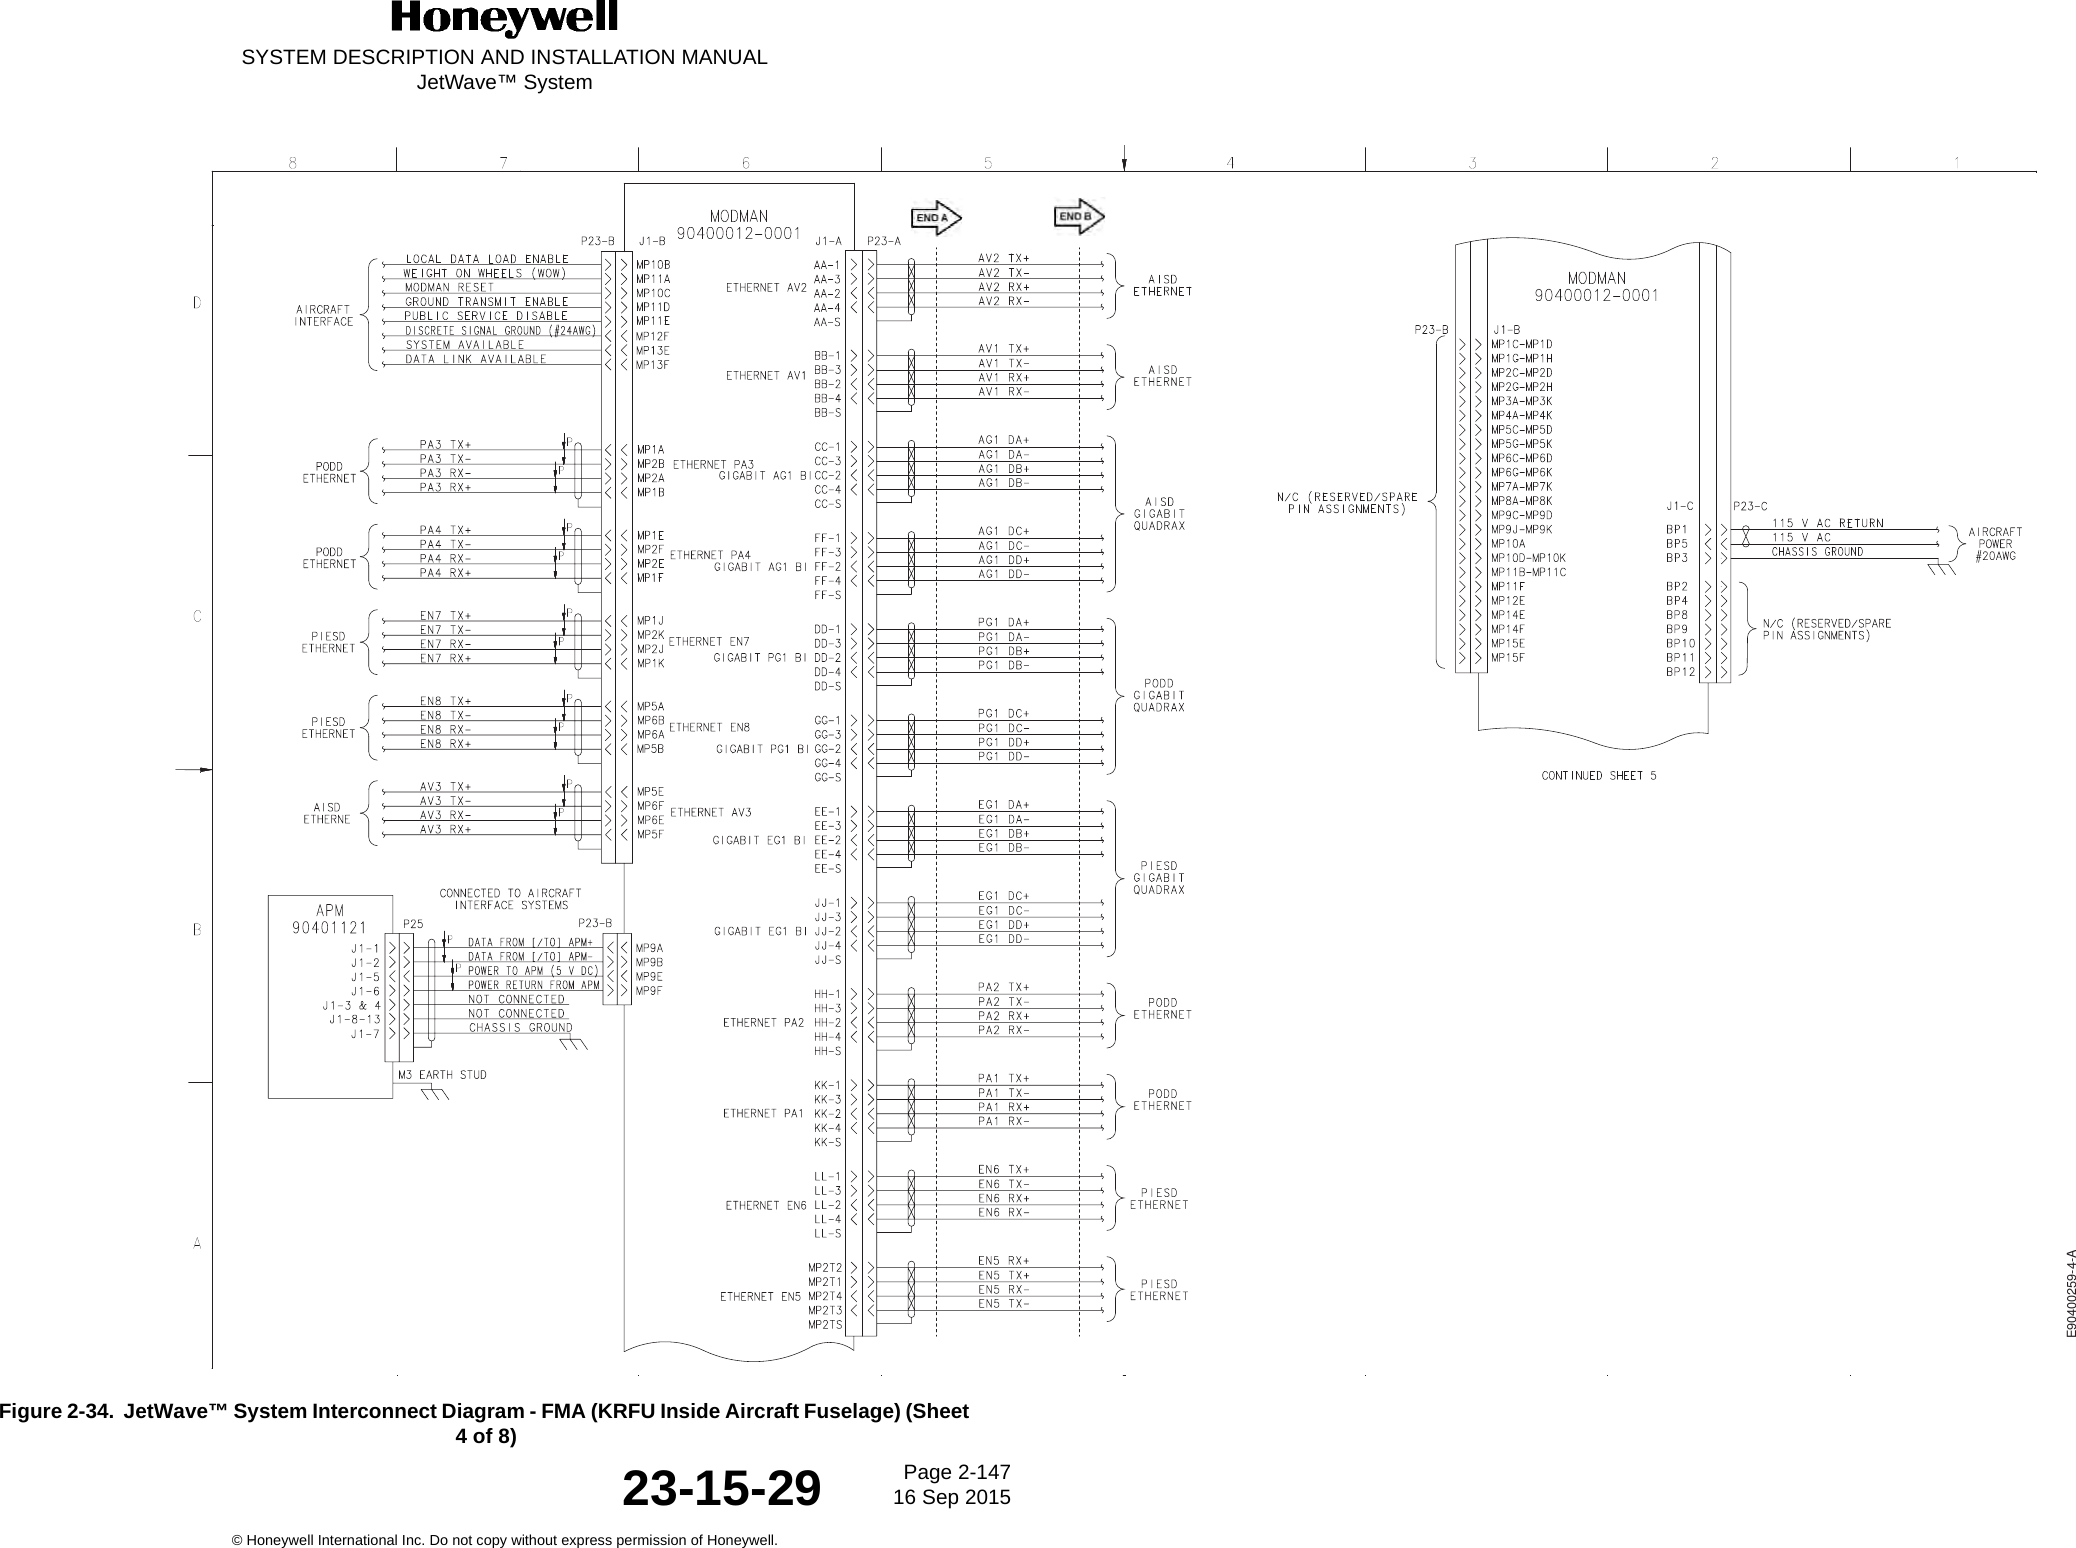 SYSTEM DESCRIPTION AND INSTALLATION MANUALJetWave™ SystemPage 2-147 16 Sep 2015© Honeywell International Inc. Do not copy without express permission of Honeywell.23-15-29Figure 2-34.  JetWave™ System Interconnect Diagram - FMA (KRFU Inside Aircraft Fuselage) (Sheet 4 of 8)E90400259-4-A